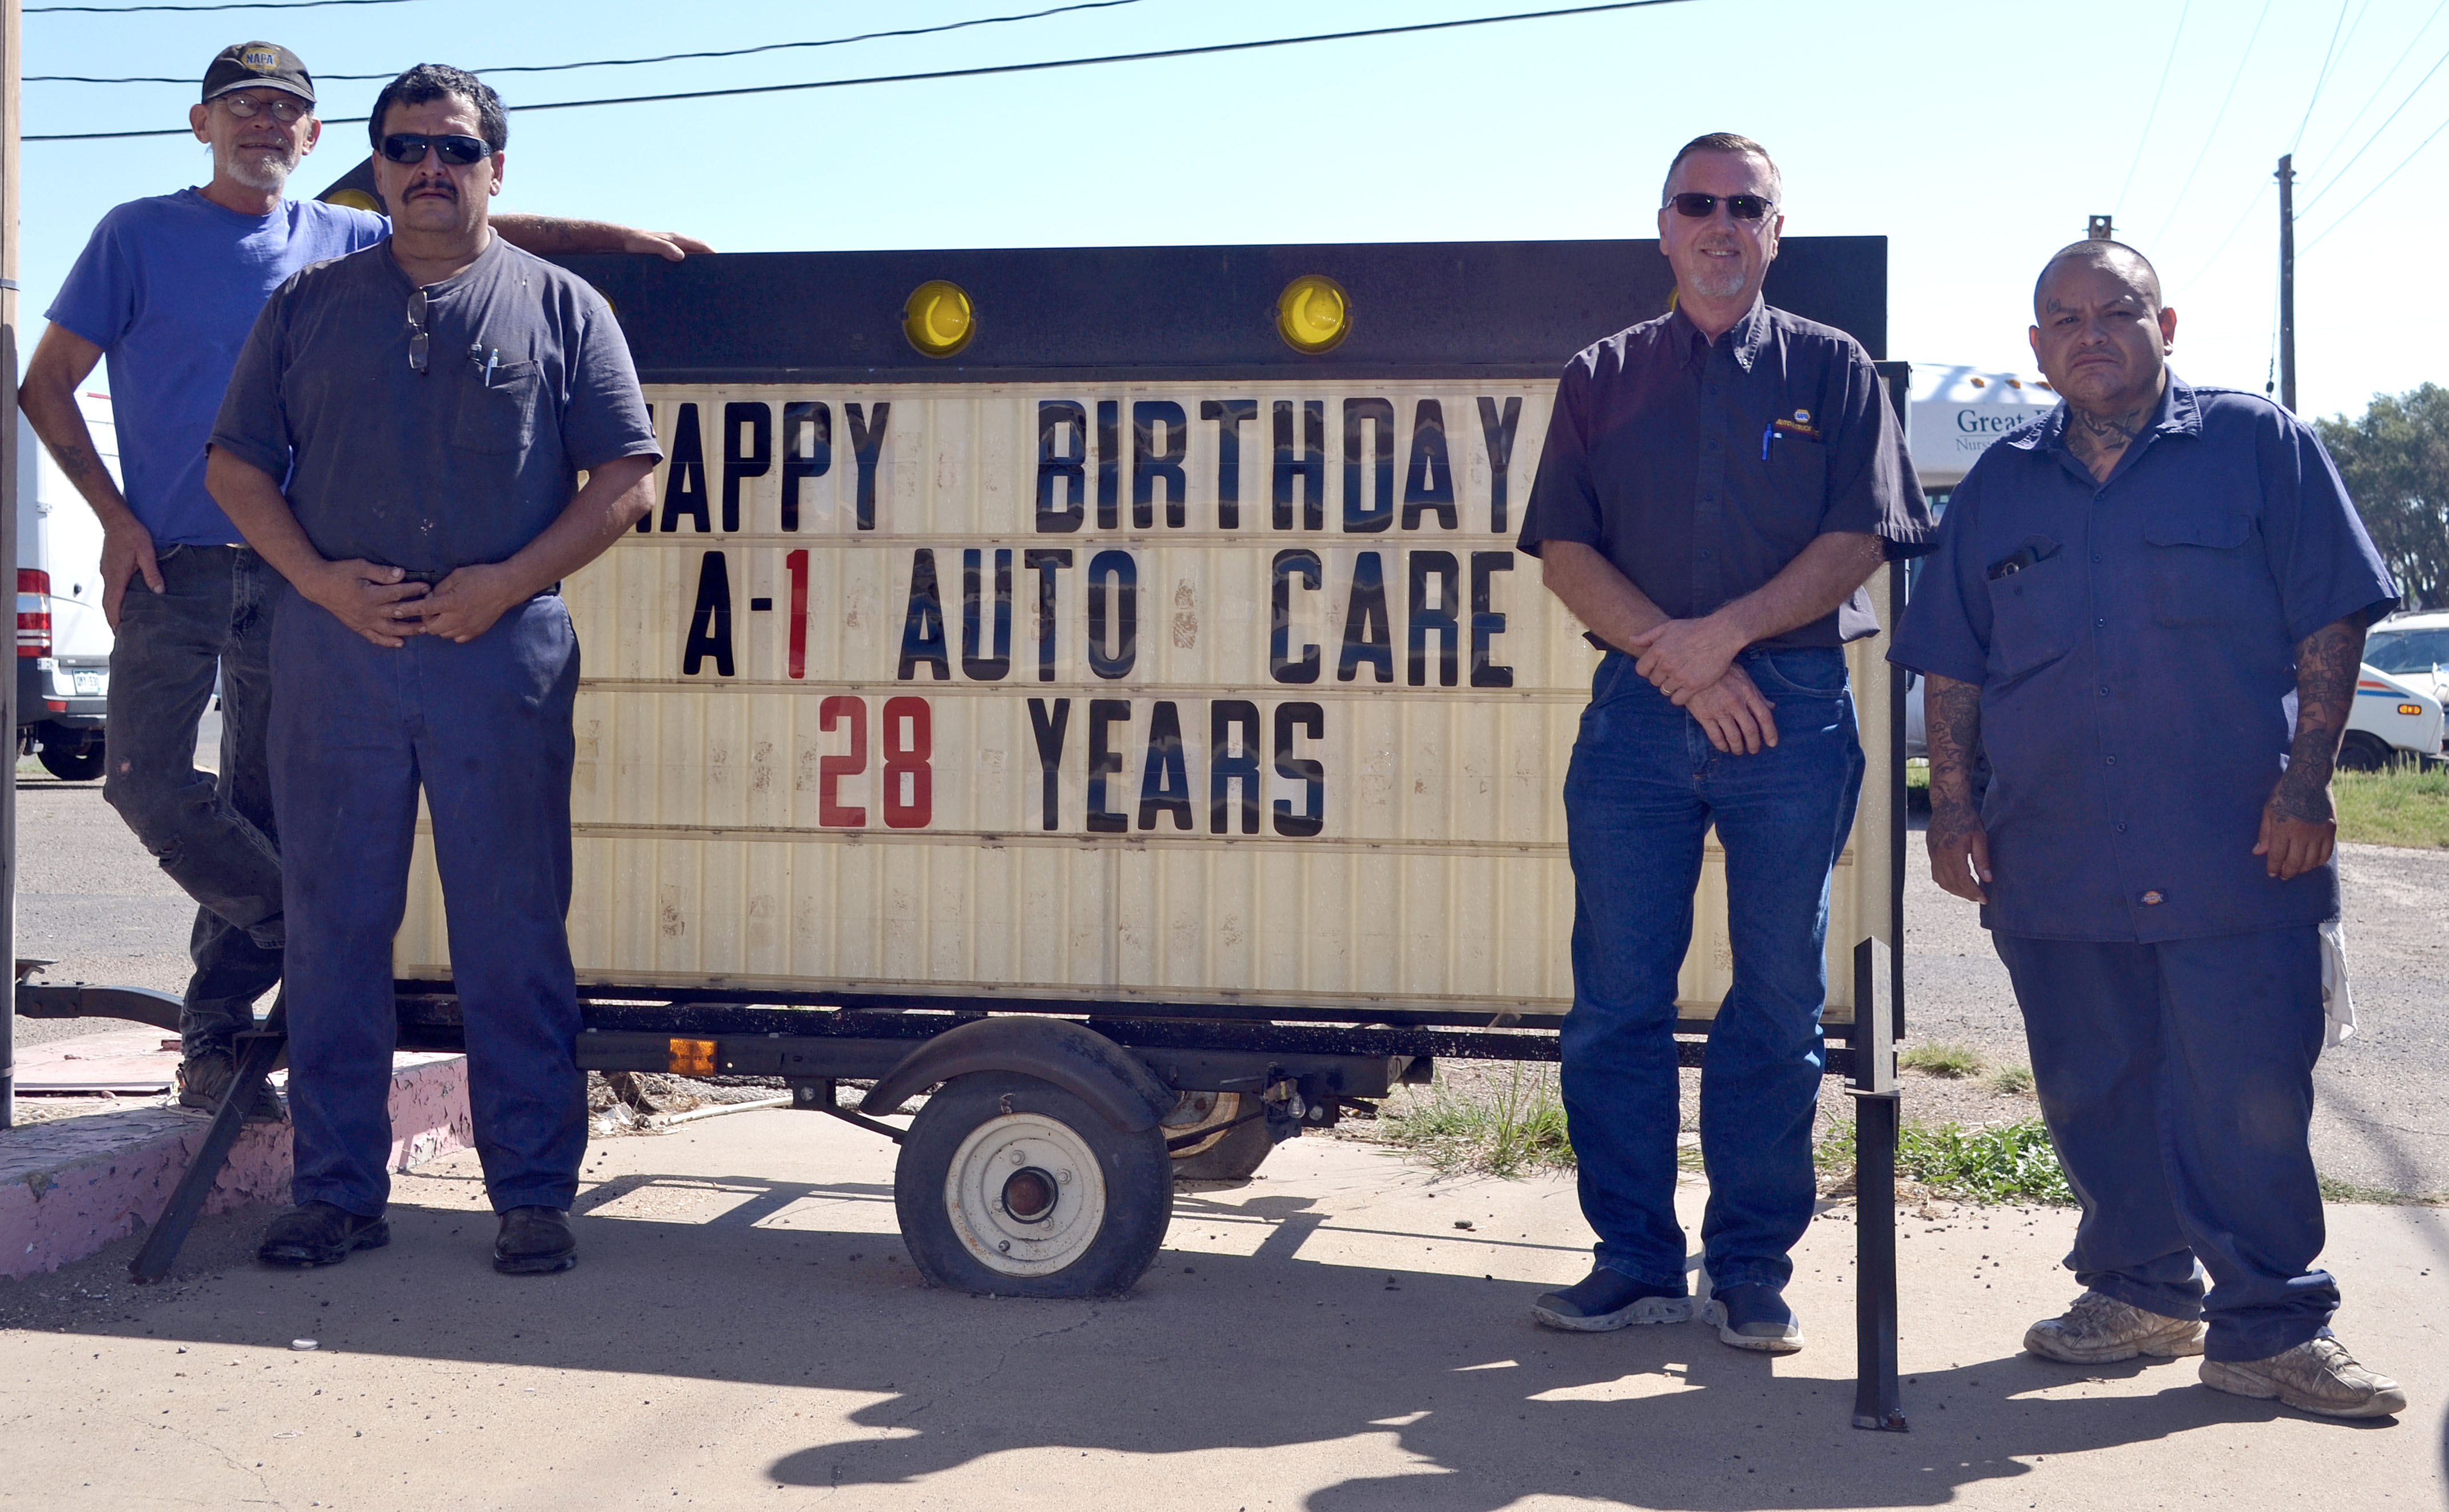 A-1 Auto Care is known for quality service — and its signs